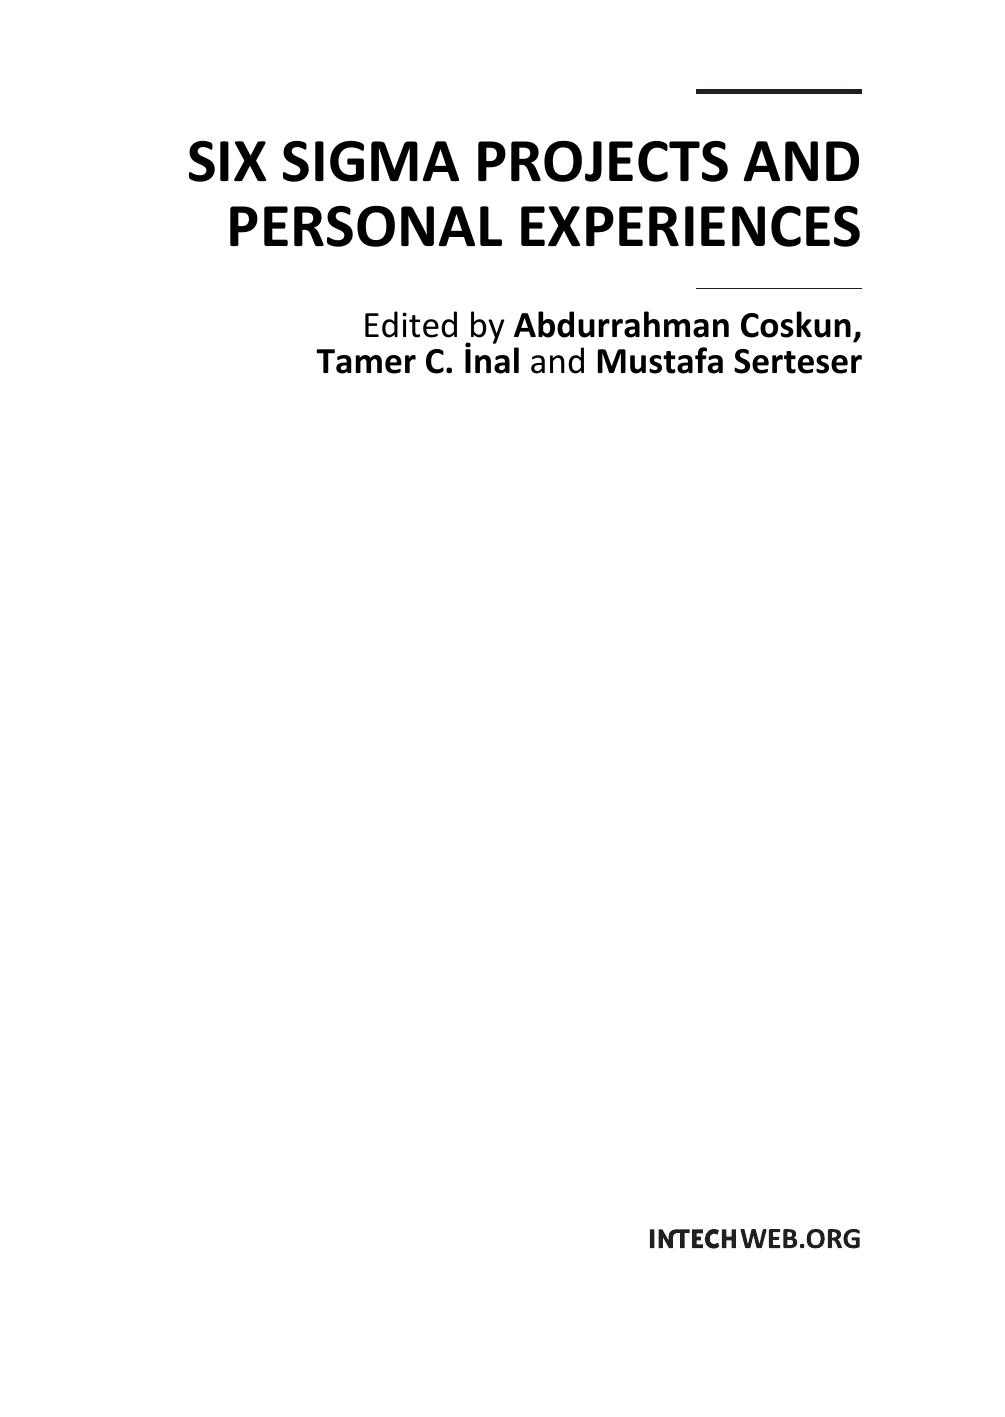 Six Sigma Projects and Personal Experiences 2011.pdf